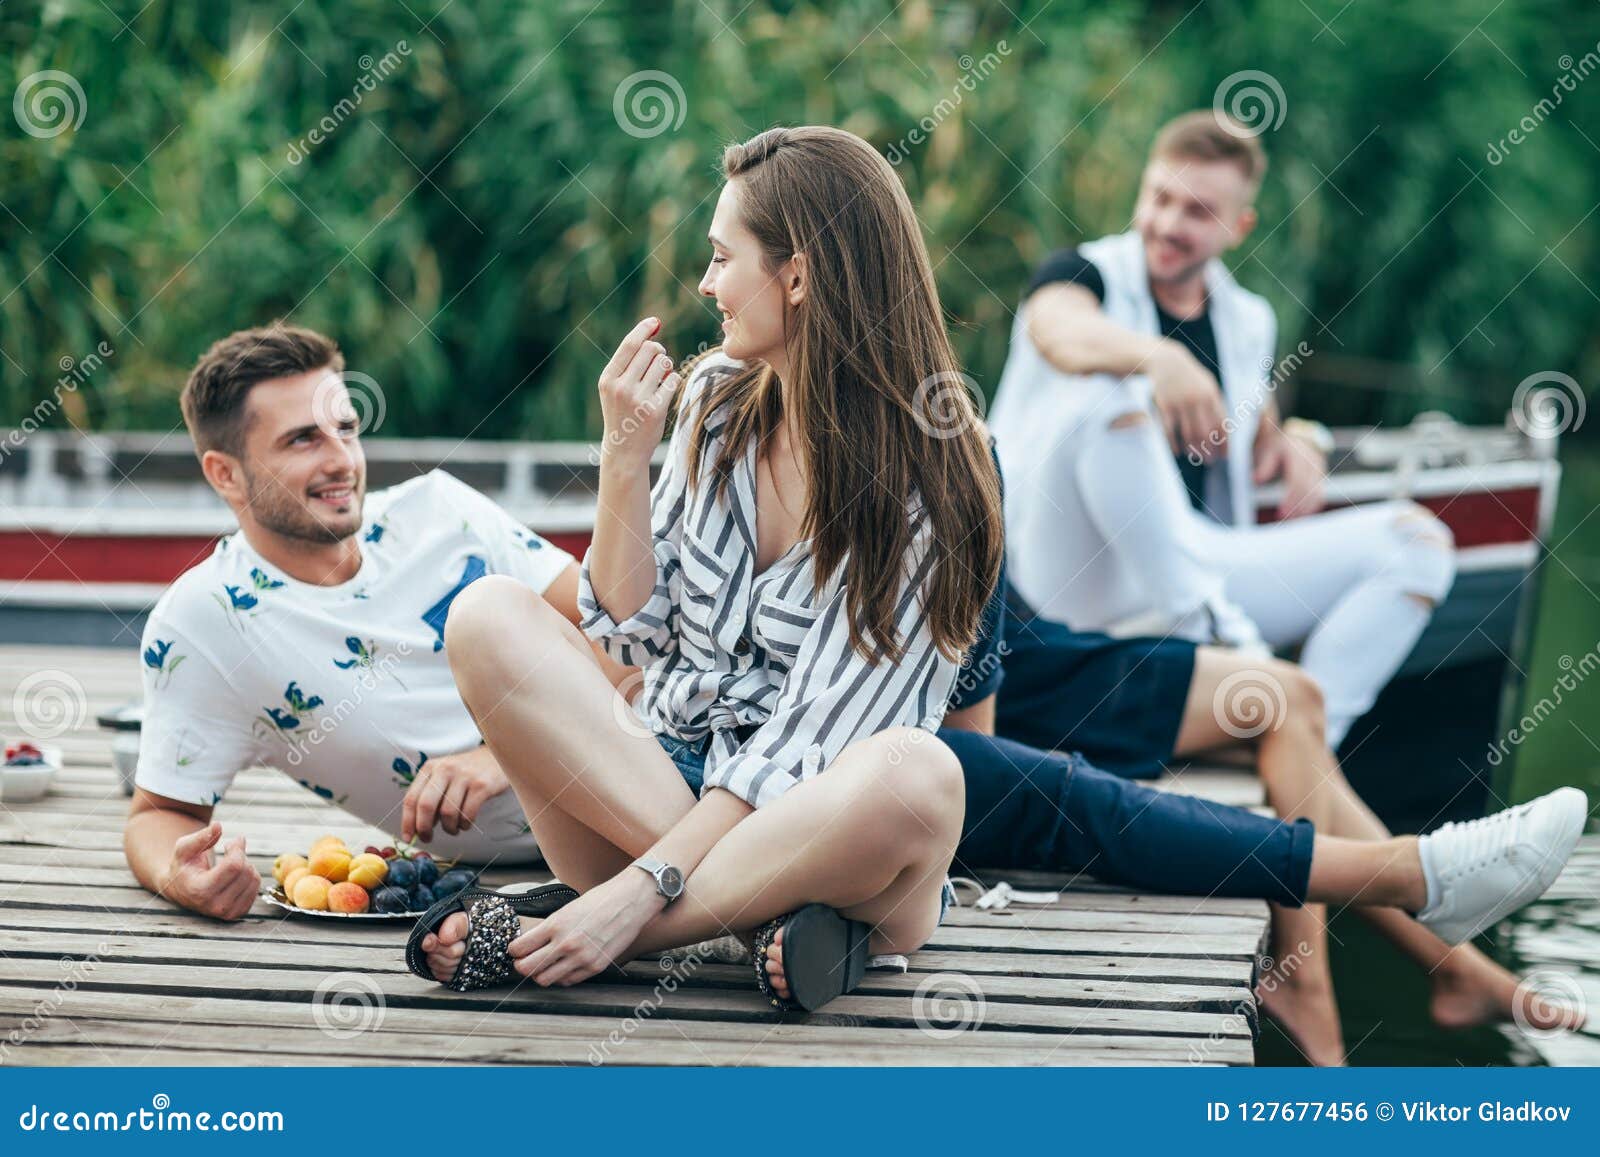 young pretty woman and handsome man flirting while relax on picnic near river